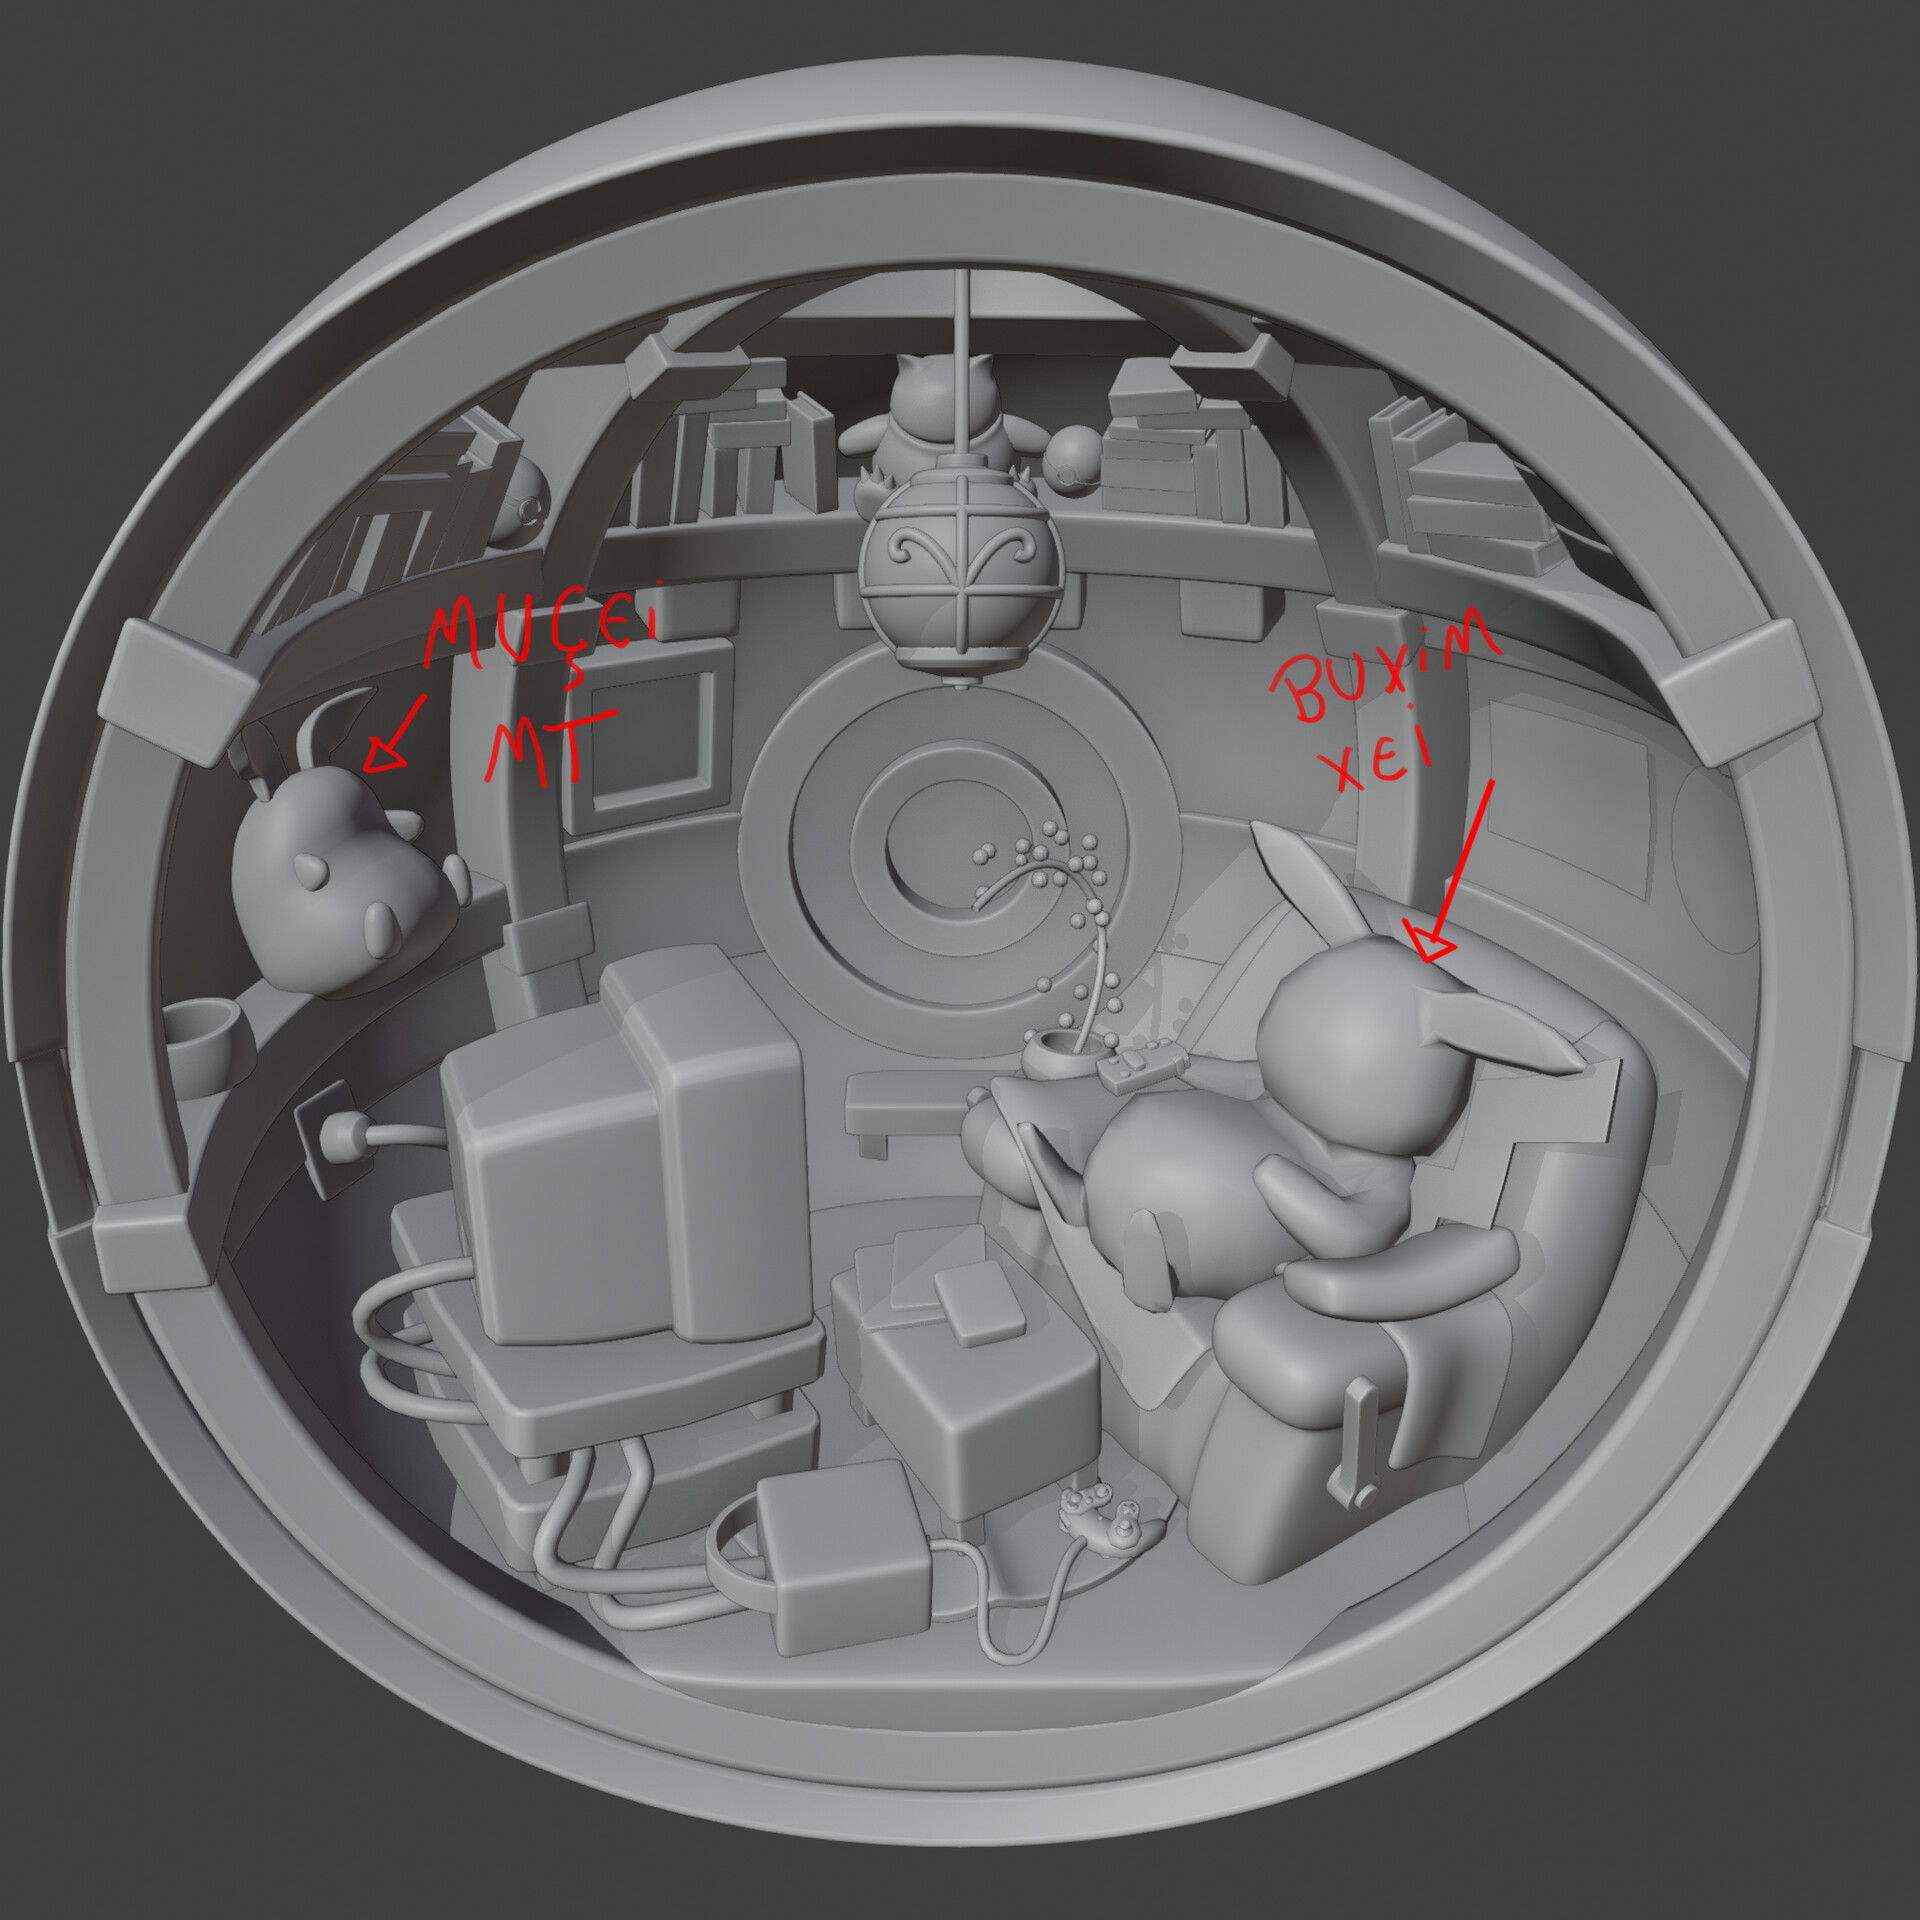 ArtStation - Pokemon inside the pokeball - Small and personal Project